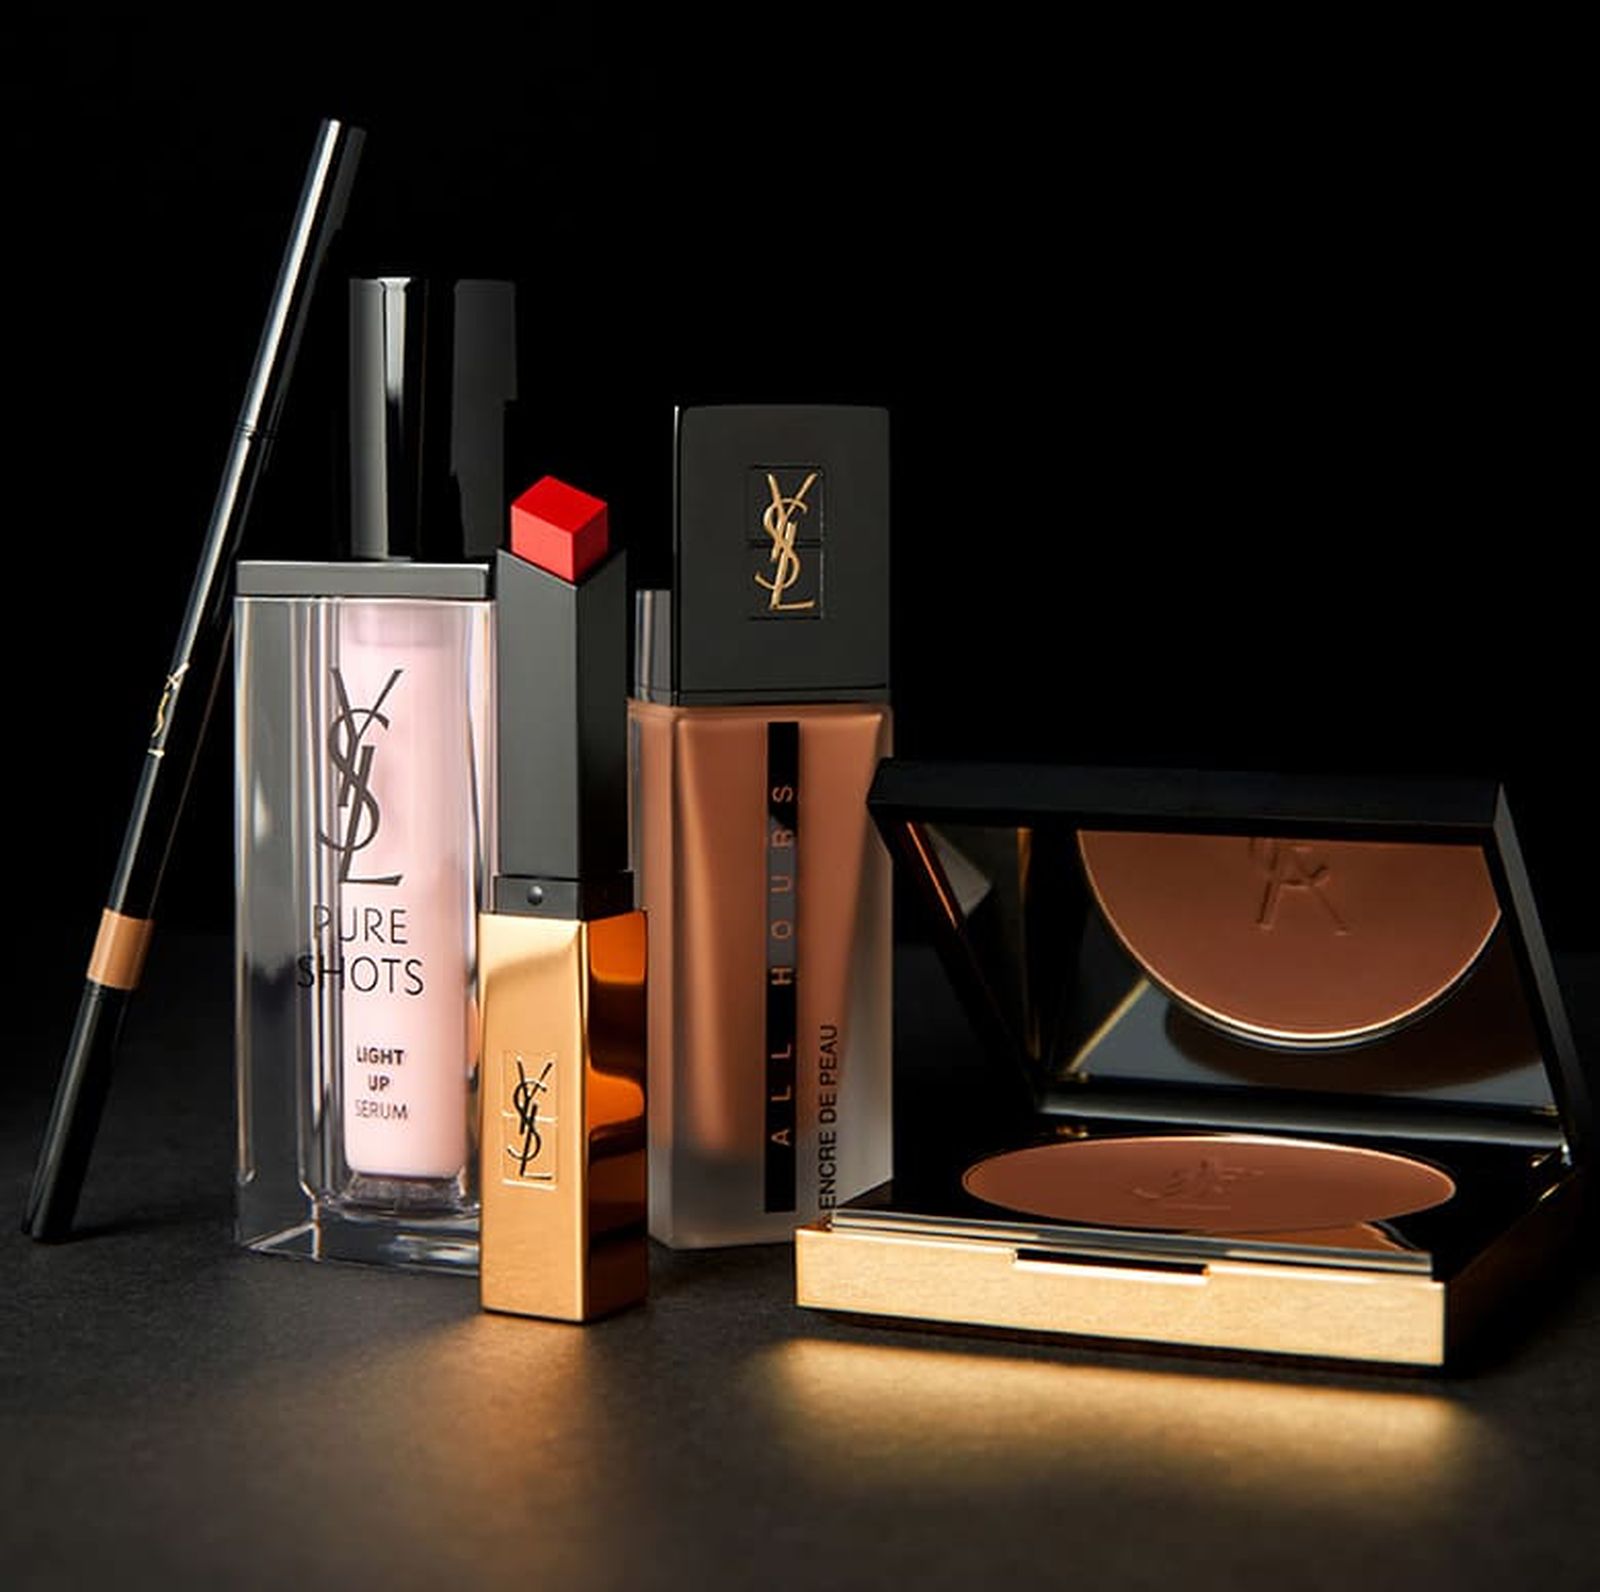 Yves Saint Laurent Beauté Couture Brow Slim, Pure Shots Light Up, Rouge Pur Couture The Slim, All Hours Foundation, All Hours Setting powder